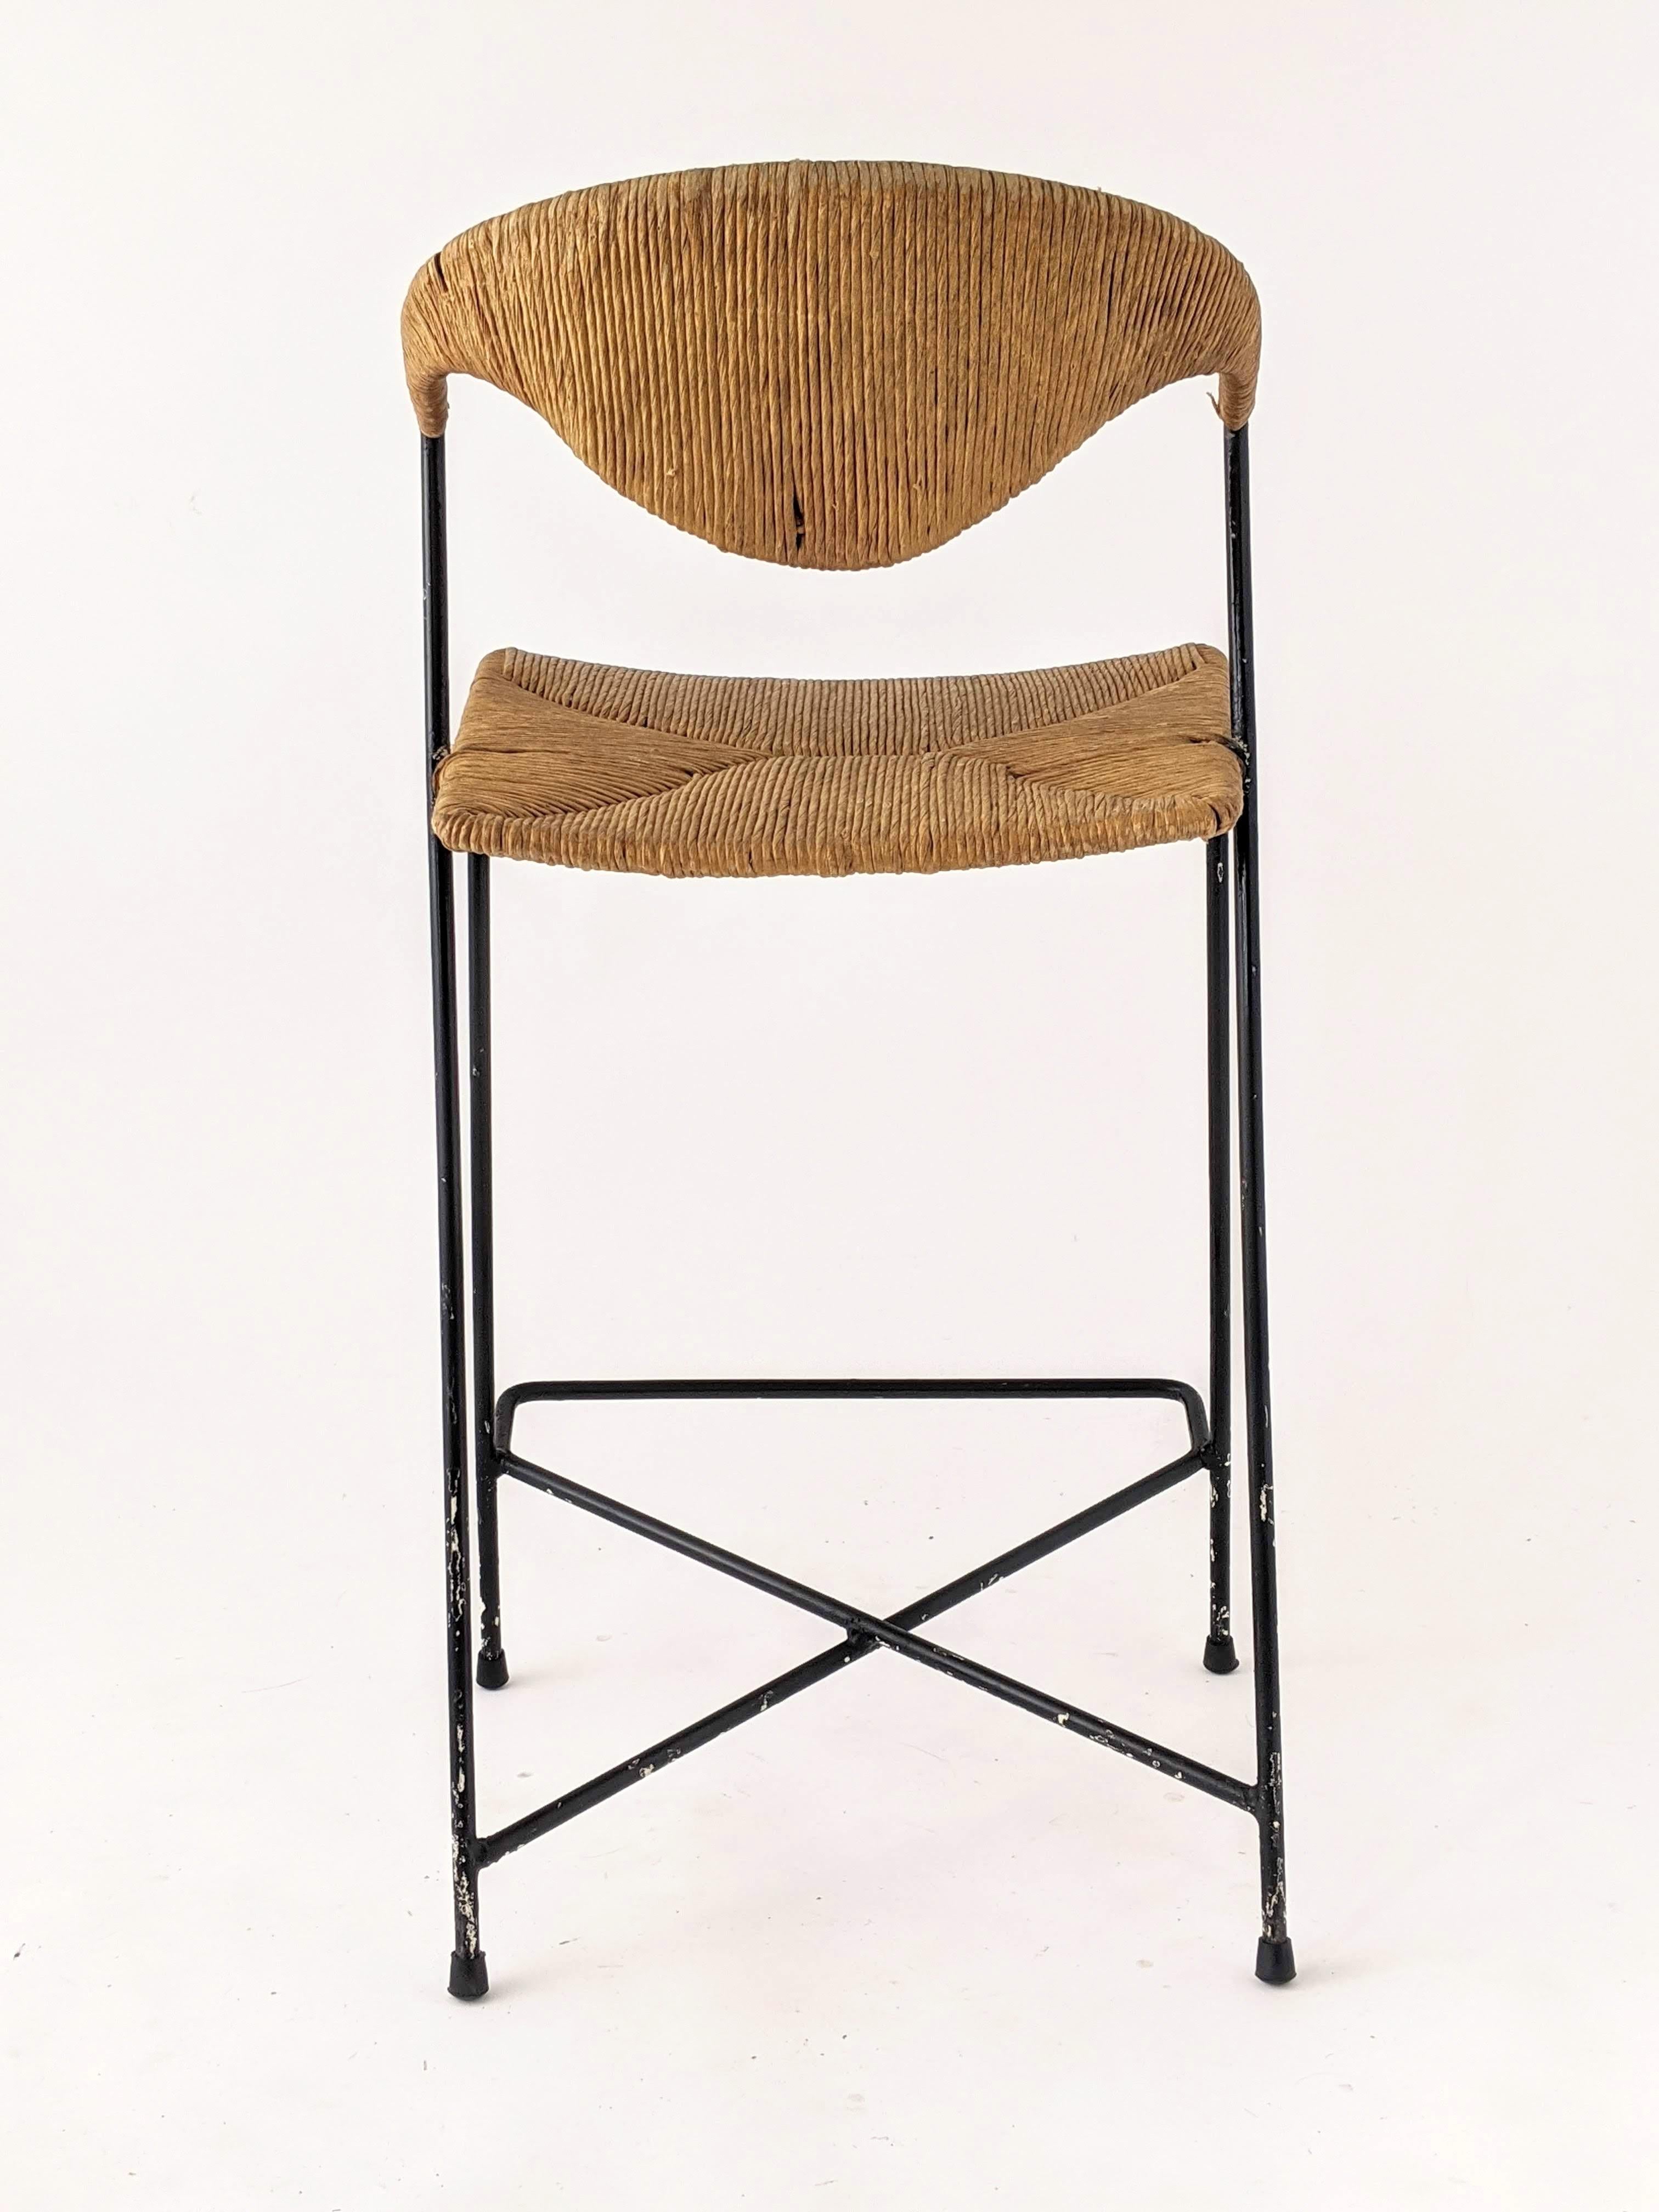 1950s Arthur Umanoff Wicker & Steel Rod High Chair, USA In Good Condition For Sale In St- Leonard, Quebec